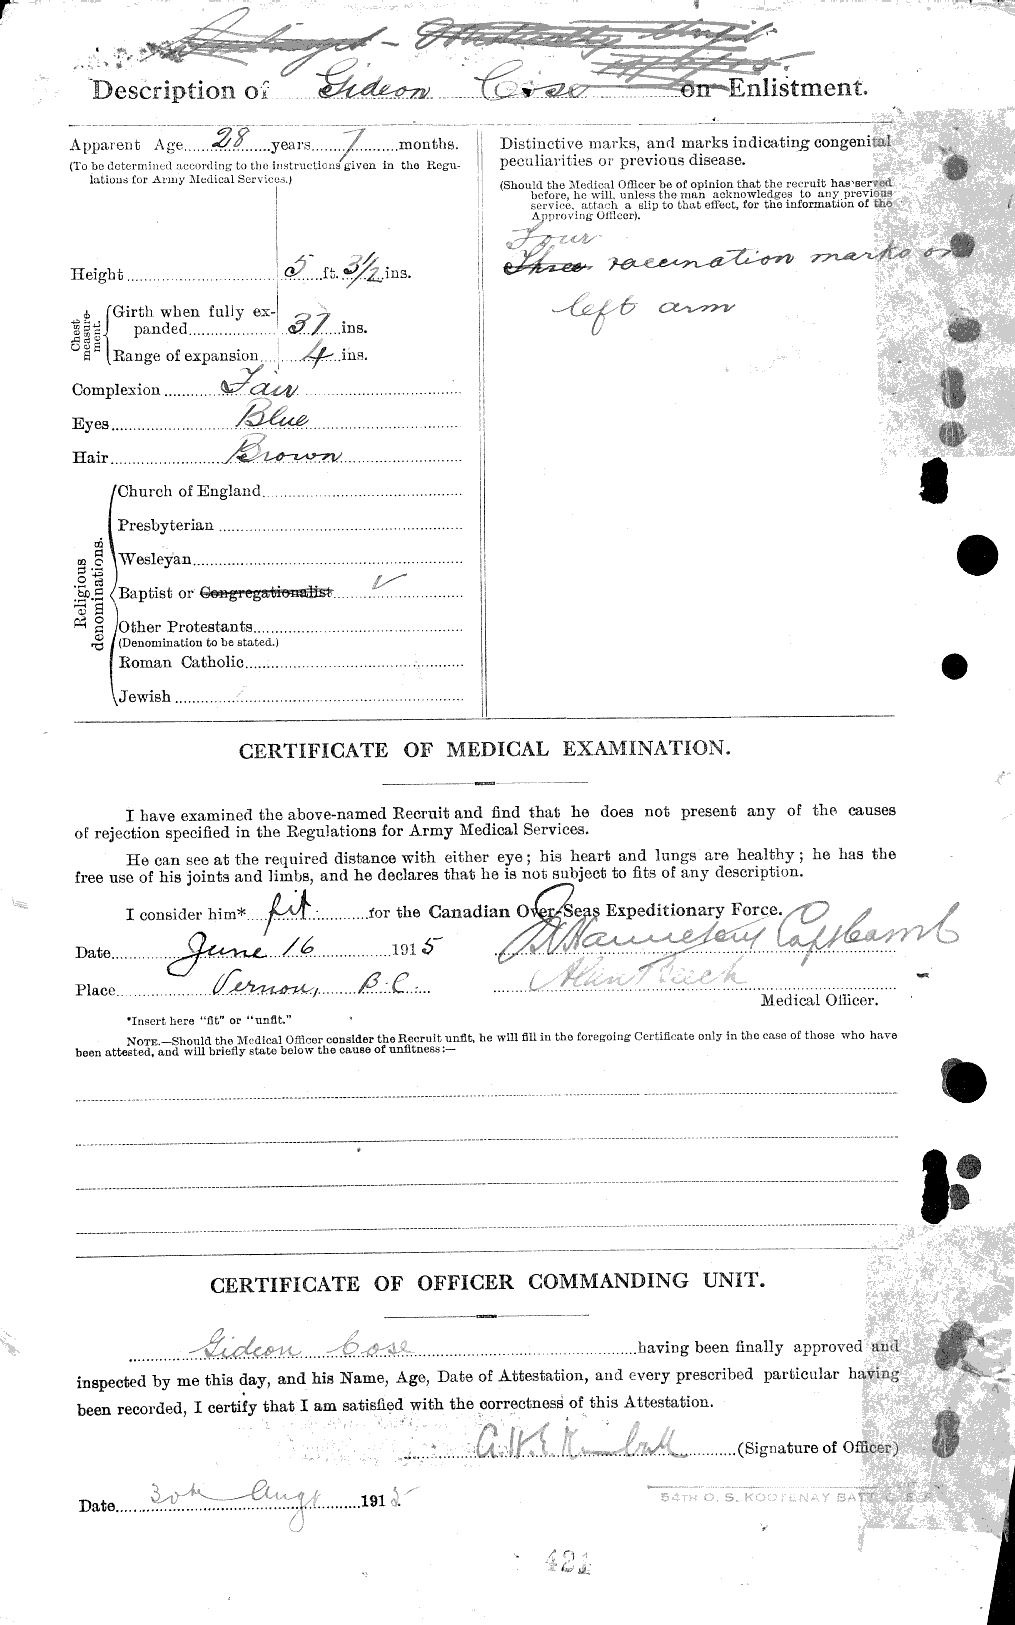 Personnel Records of the First World War - CEF 012708b